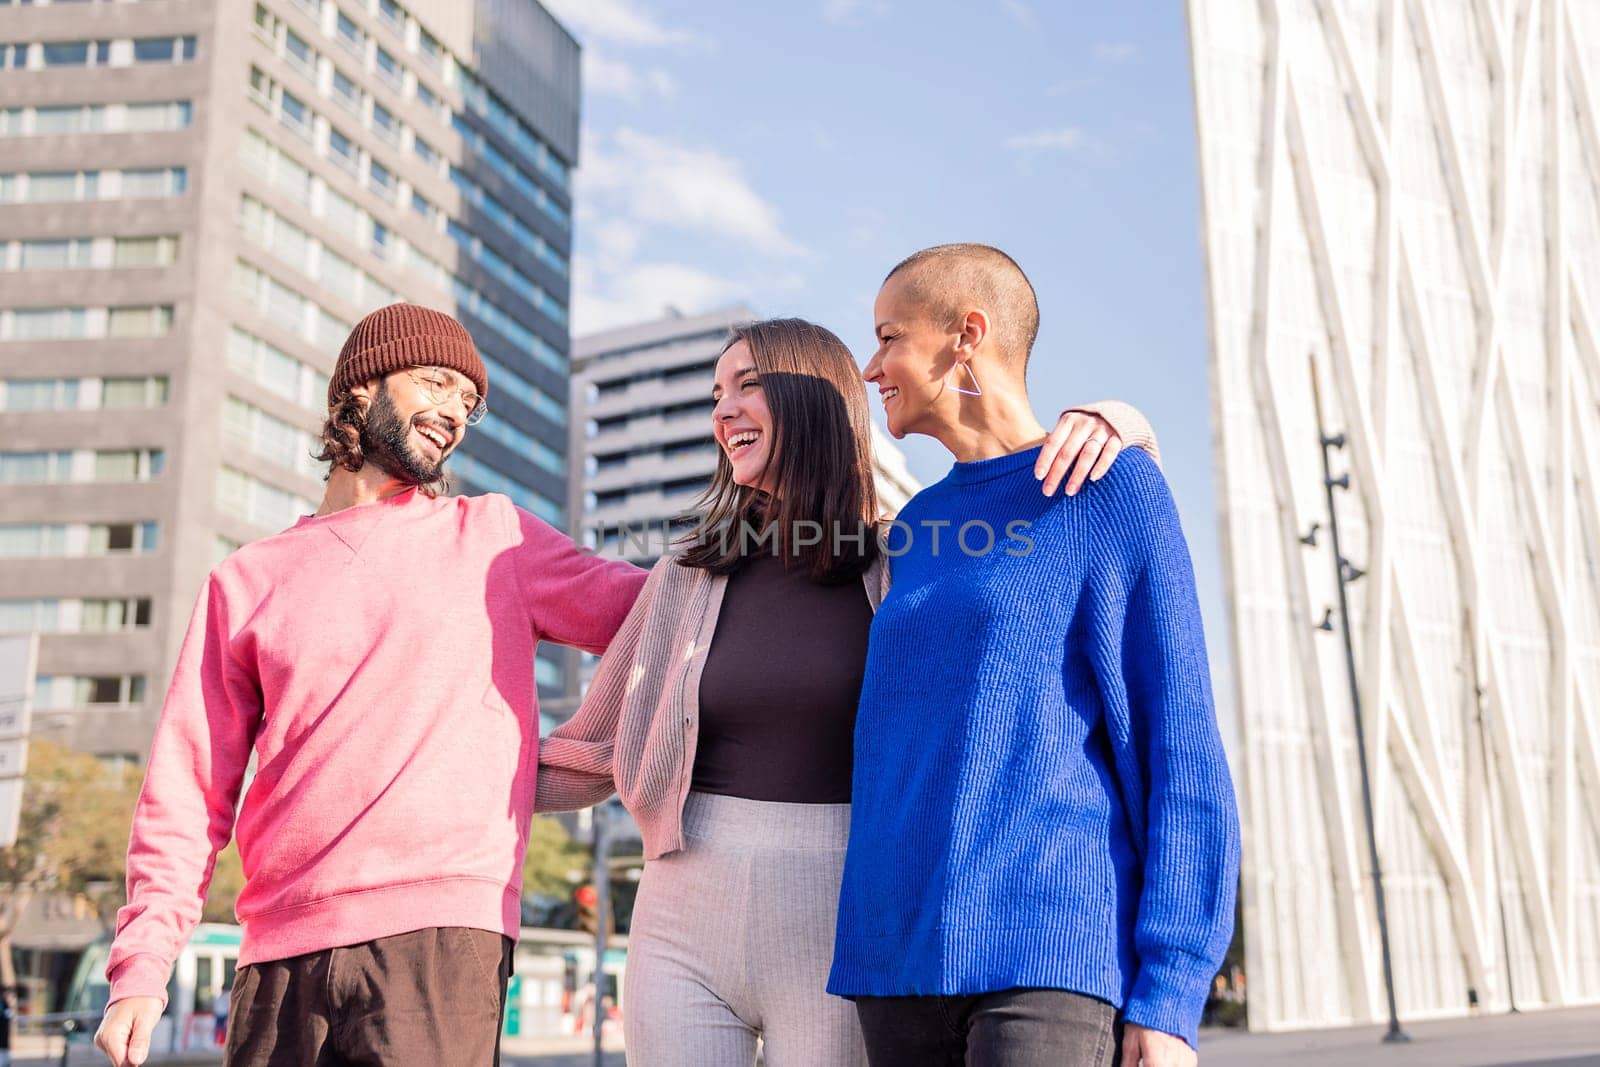 three young friends, one man and two women, laughing and hugging during a casual walk, concept of friendship and urban lifestyle